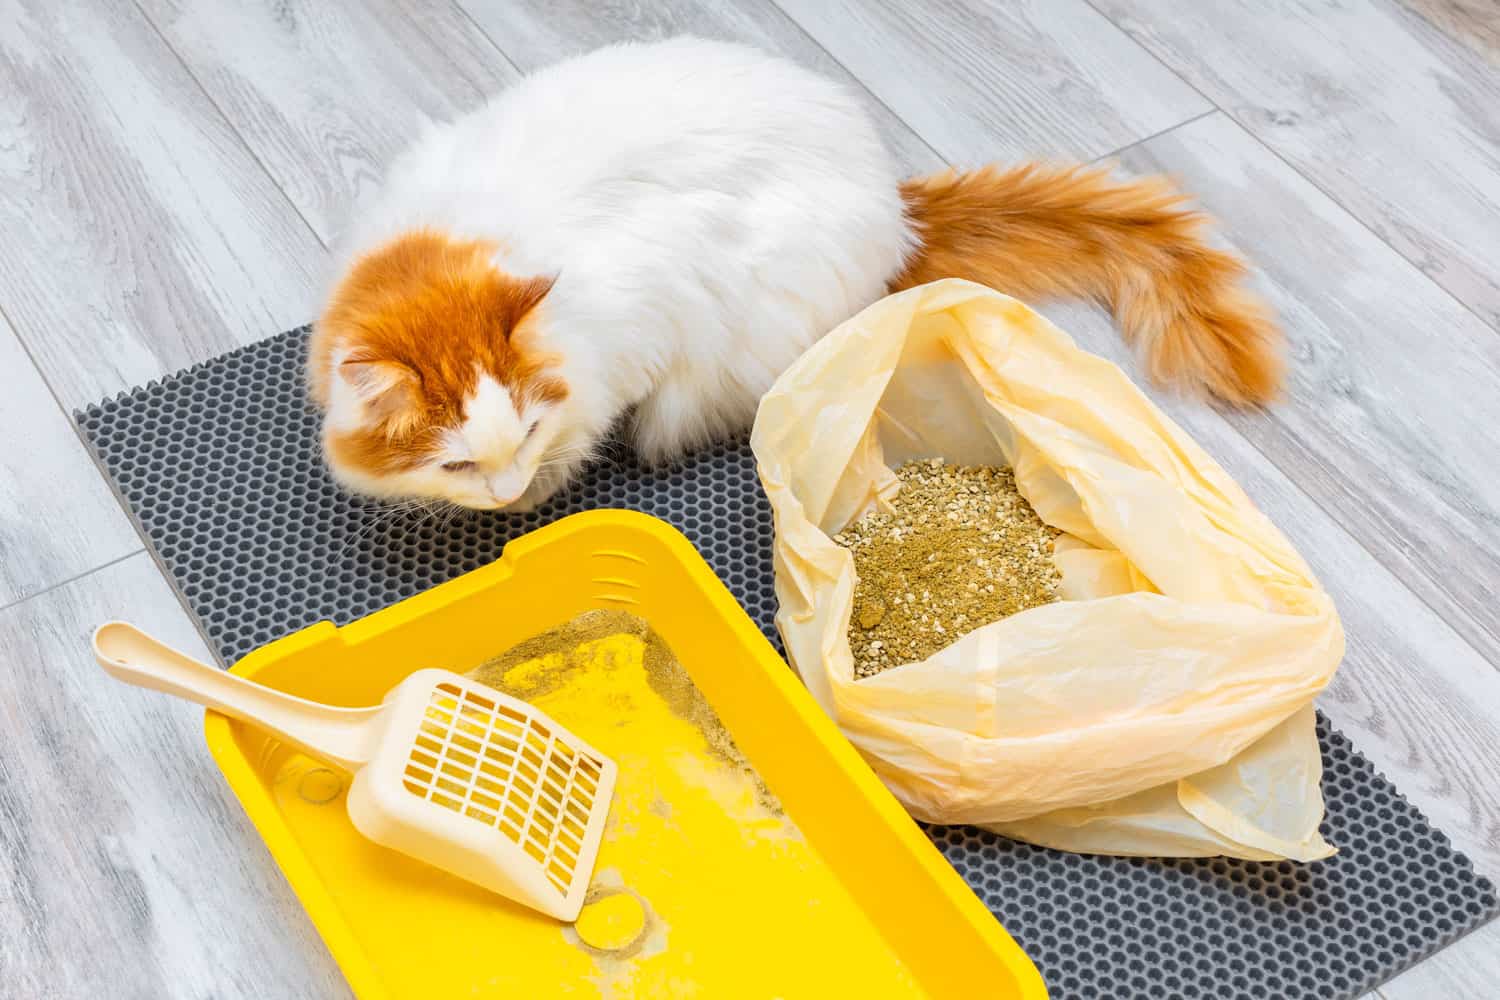 replacing dry litter in a cat litter box. cleaning up used cat litter. cat watching cat litter cleaning. High quality photo dirty litter box cause infection
